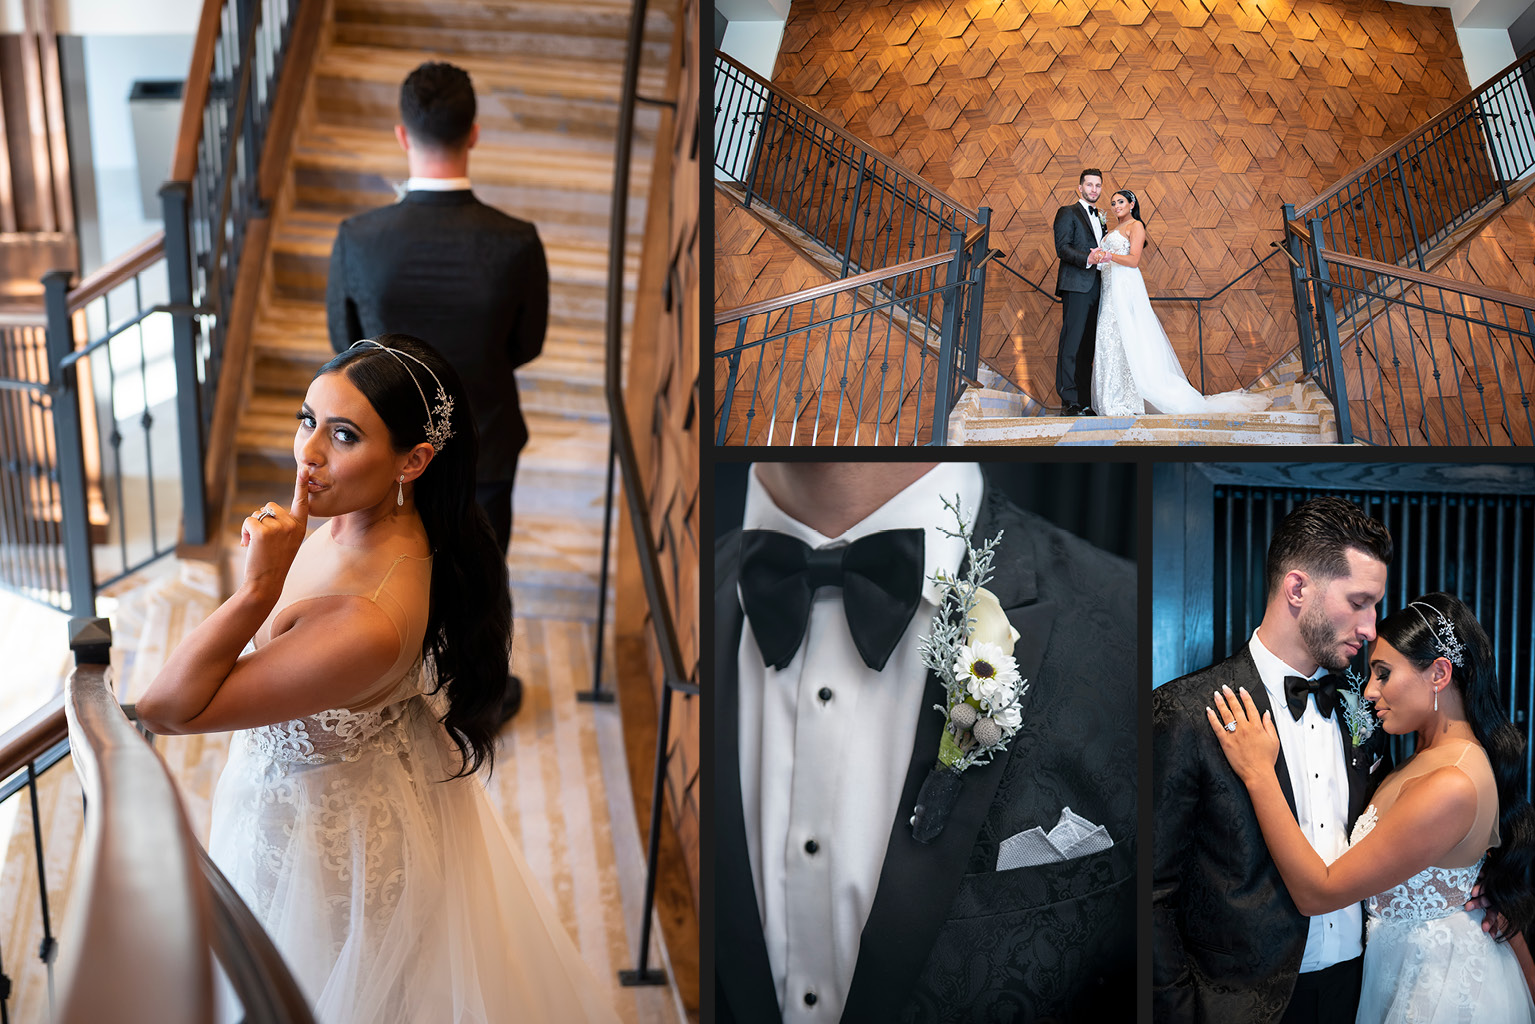 First look at the Sheraton Eatontown Hotel's wedding styled shoot